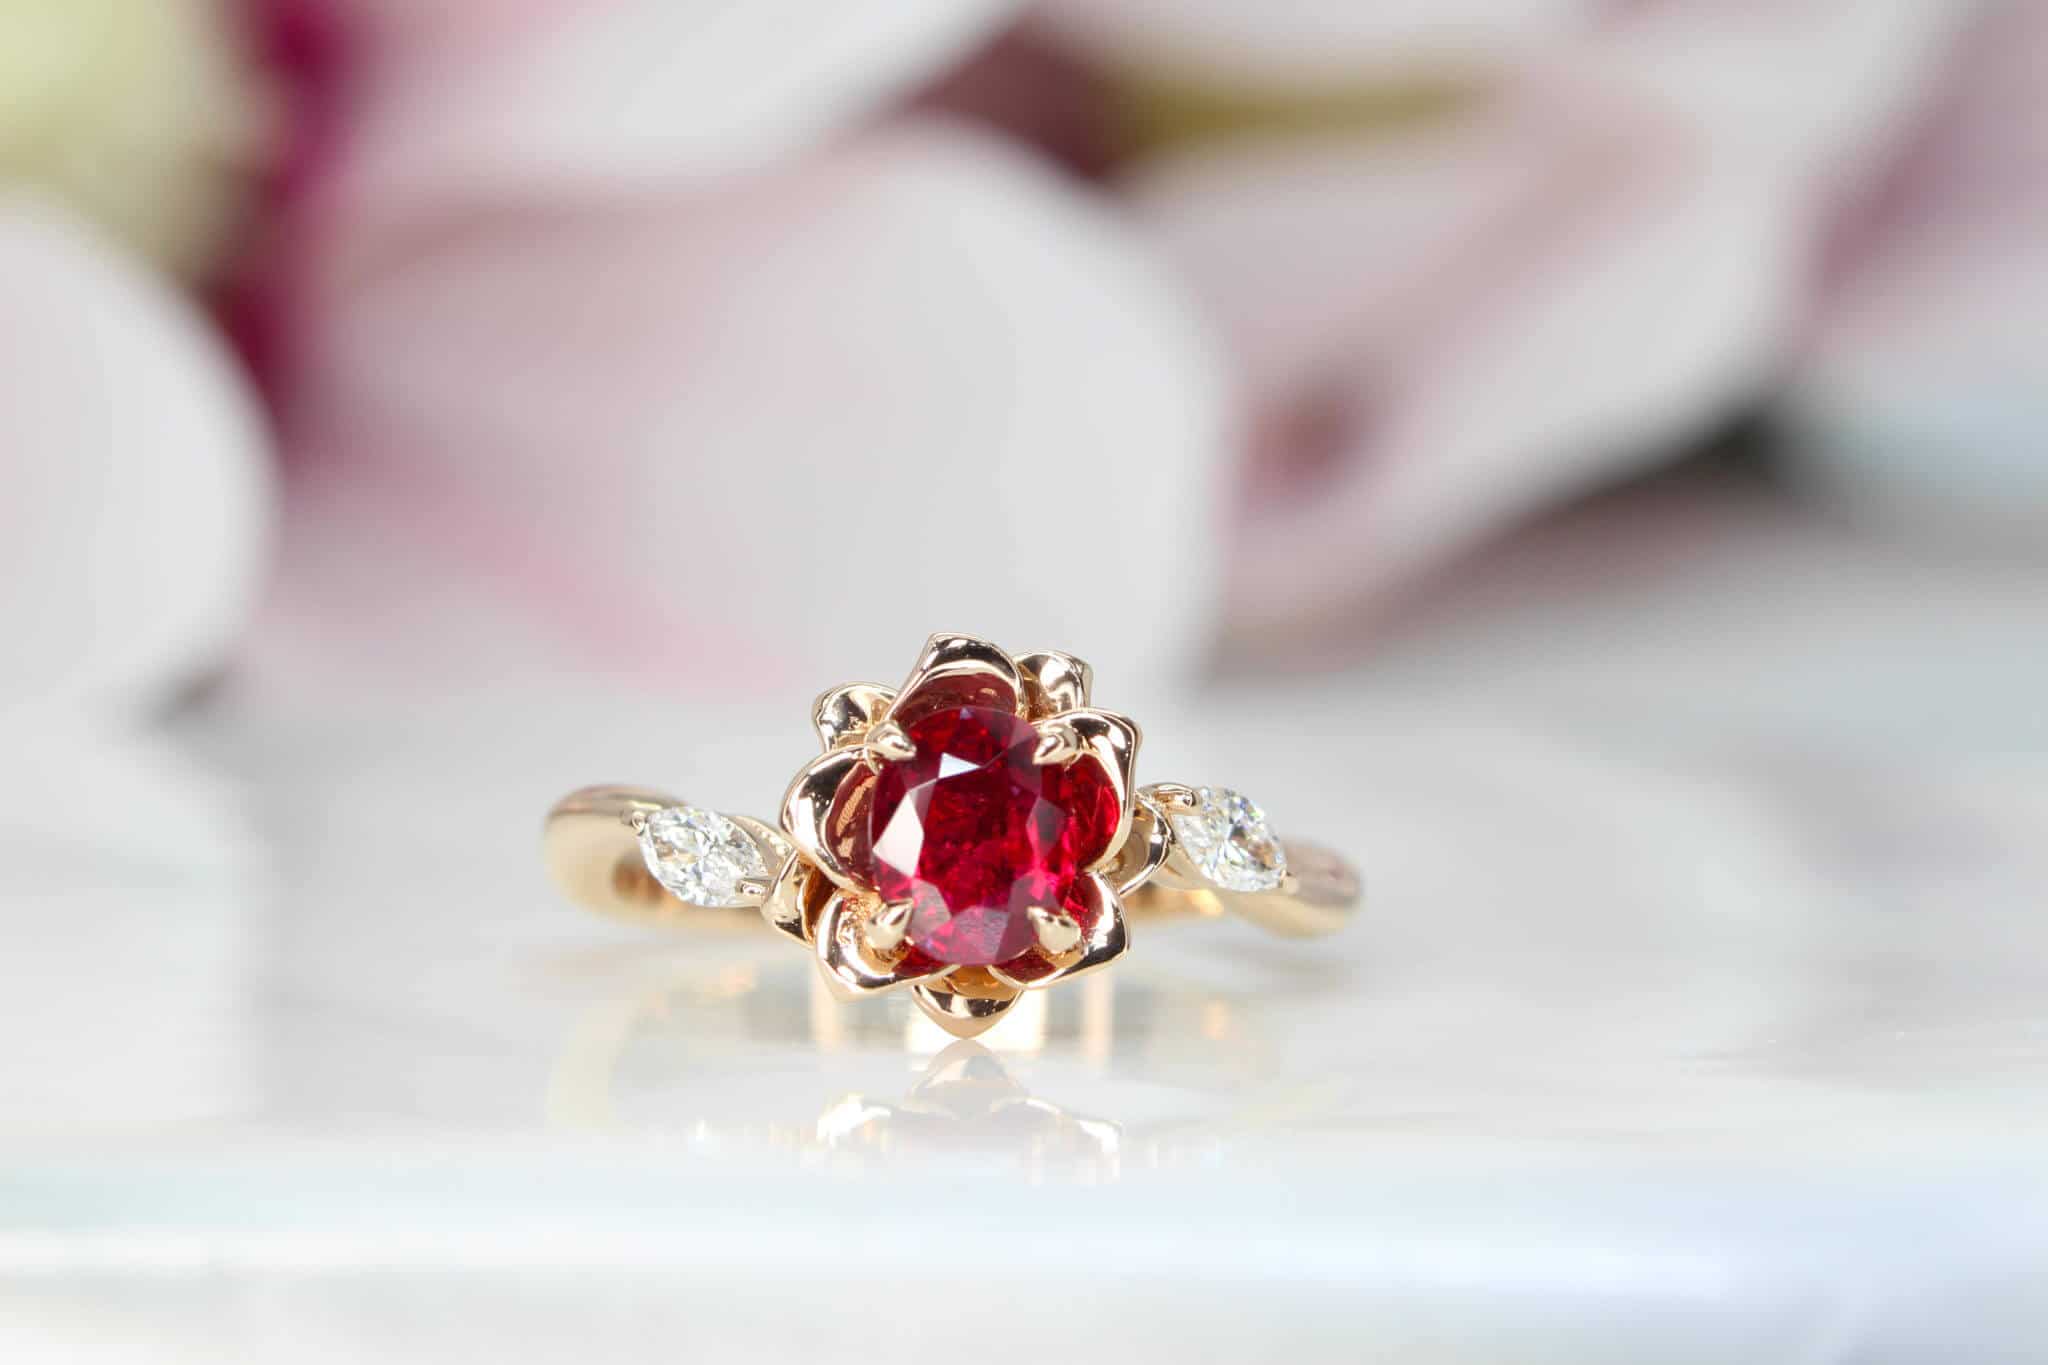 Engagement ring features an unheat vivid red ruby rare gemstone. With a liking for flora design, we customised this engagement ring with marquise diamond with flora leaves and petals in rose gold surrounding the ruby gemstone | Local Singapore Jeweller in engagement ring and wedding jewellery.